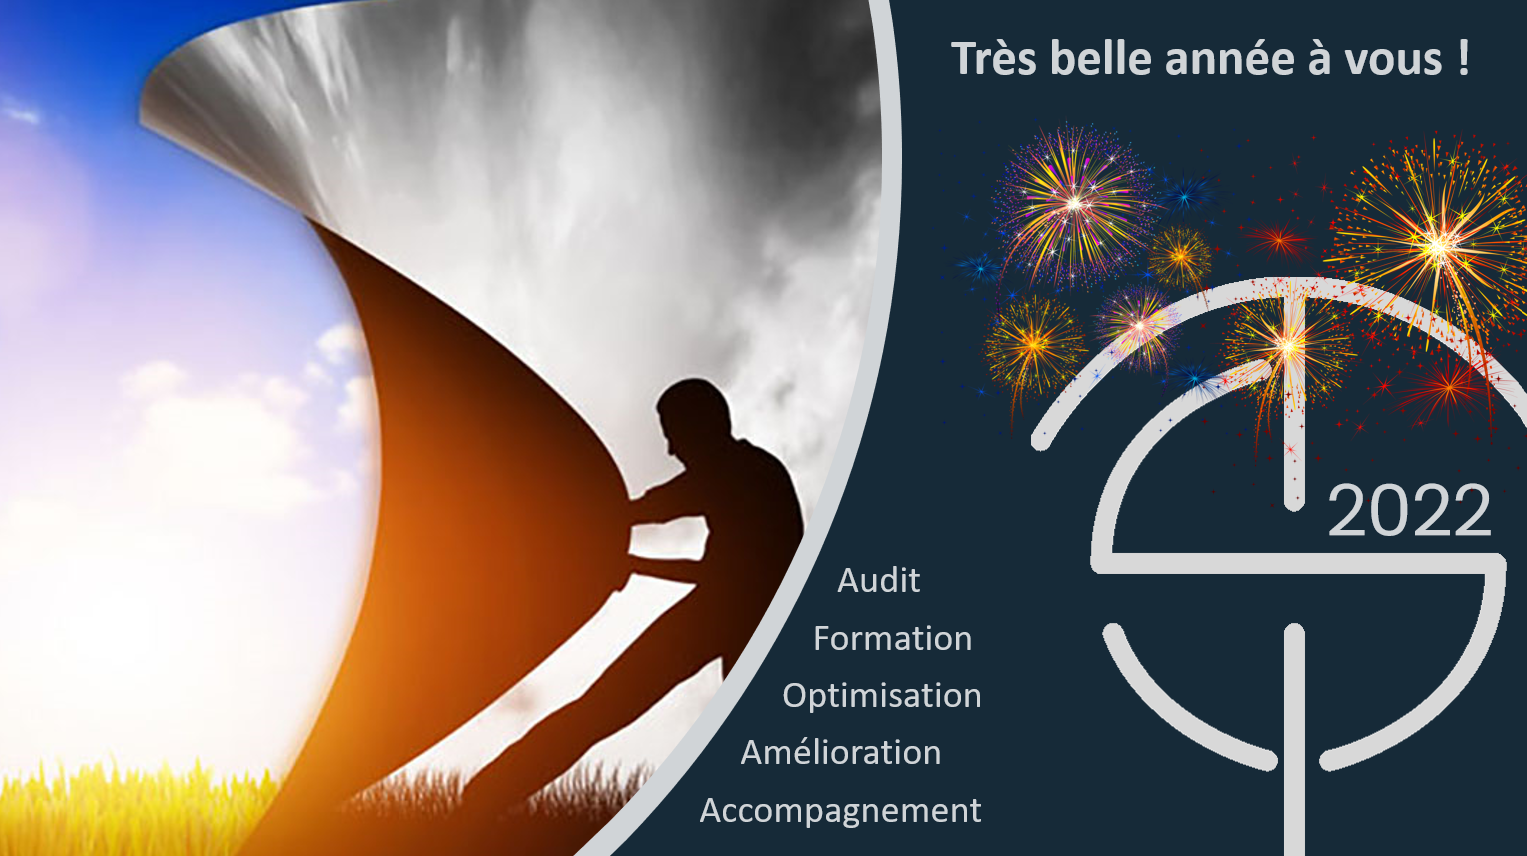 GST consulting vous accompagne en 2022